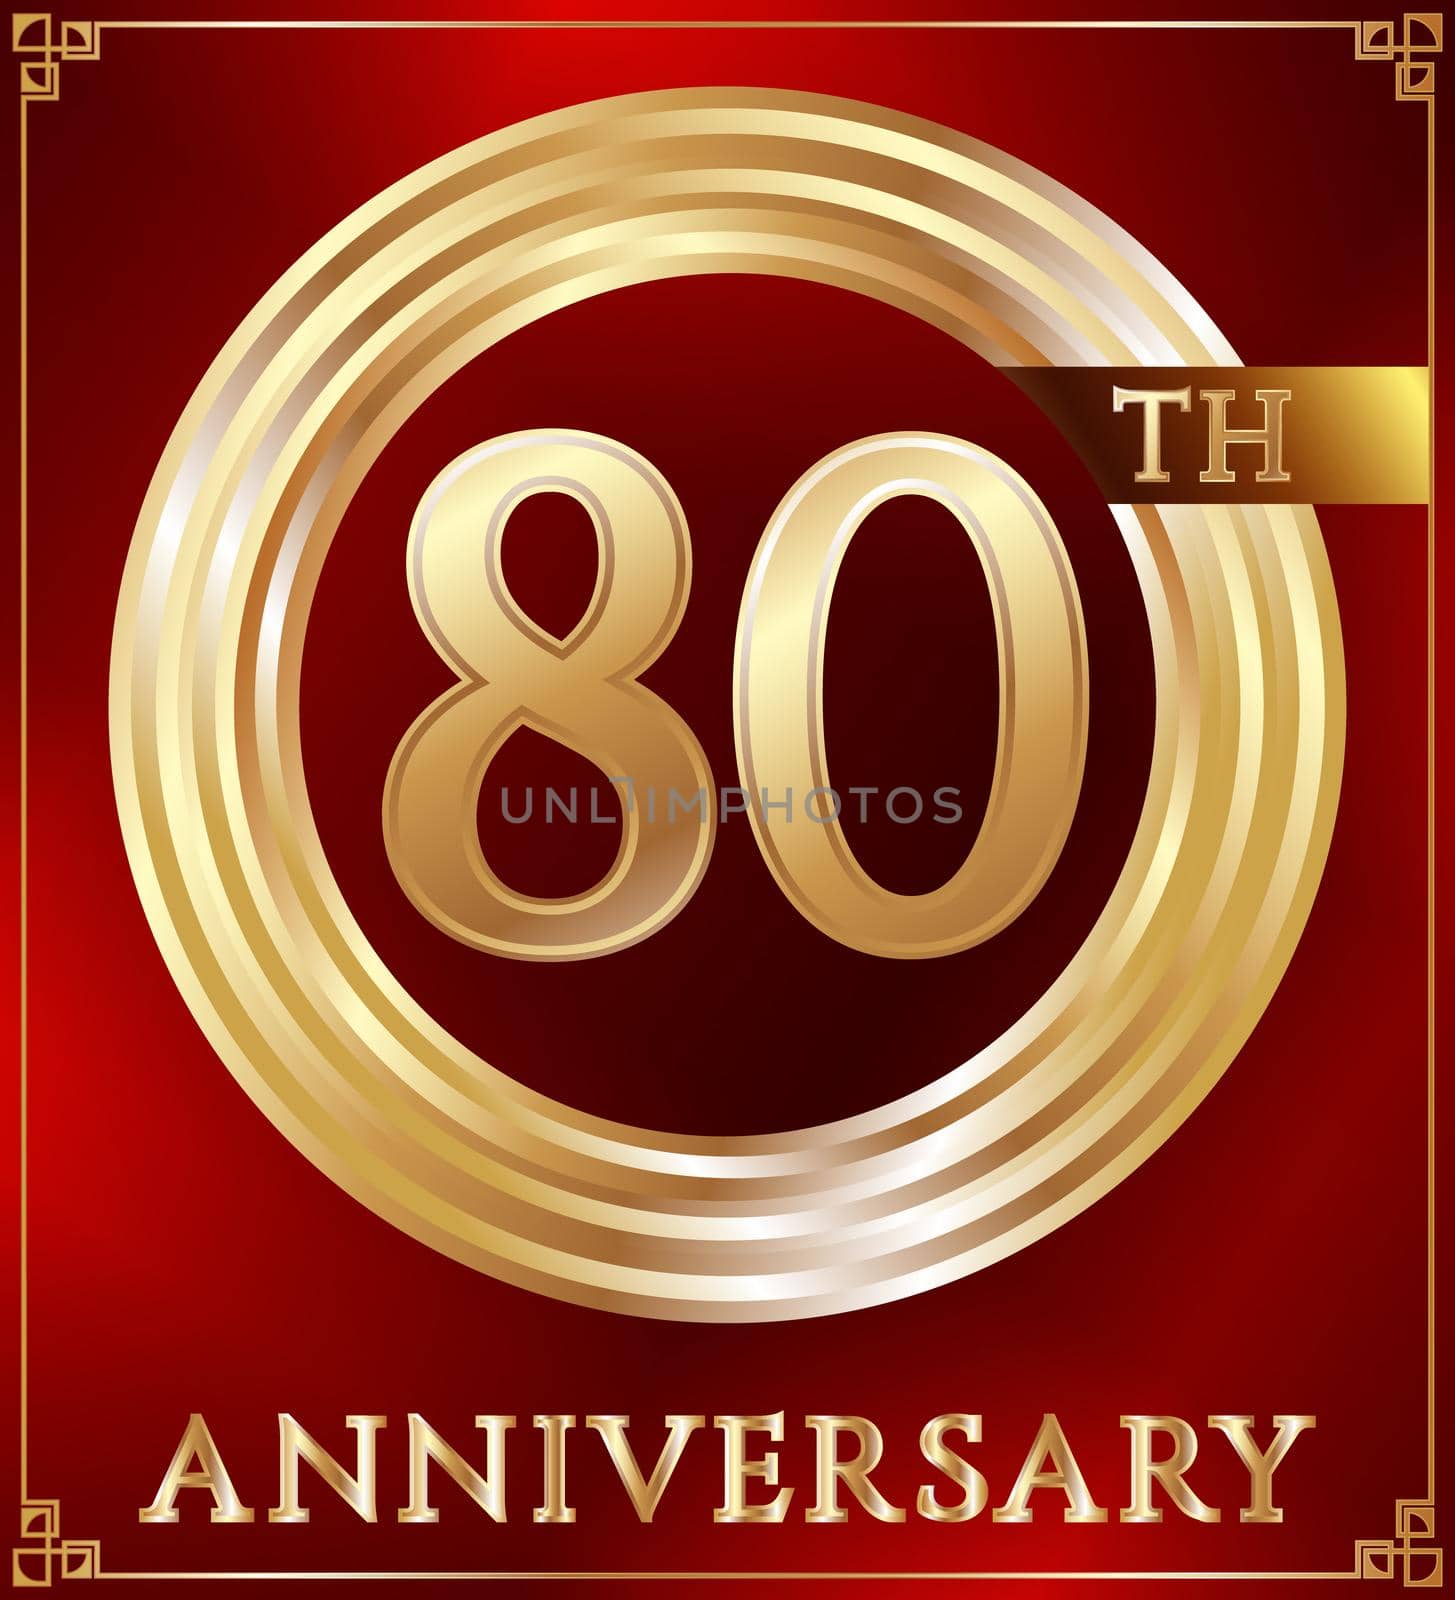 Anniversary gold ring logo number 80. Anniversary card. Red background. Vector illustration.